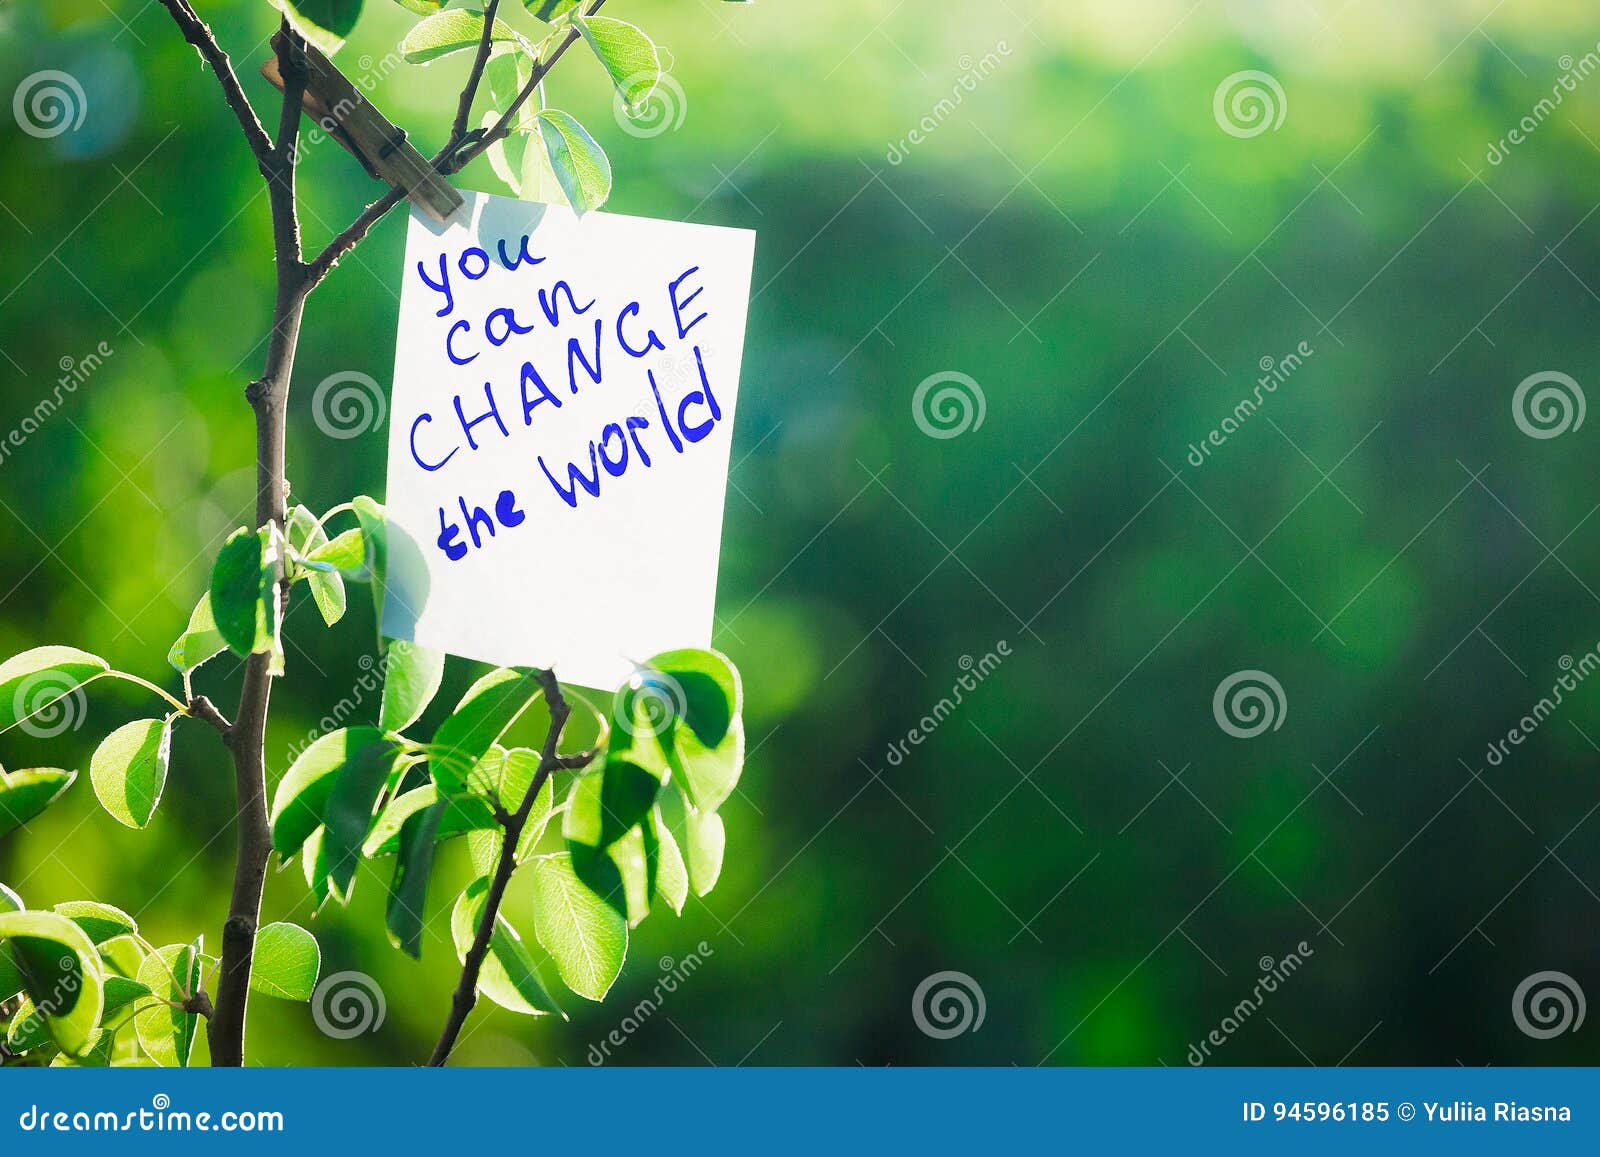 motivating phrase you can change the world. on a green background on a branch is a white paper with a motivating phrase.